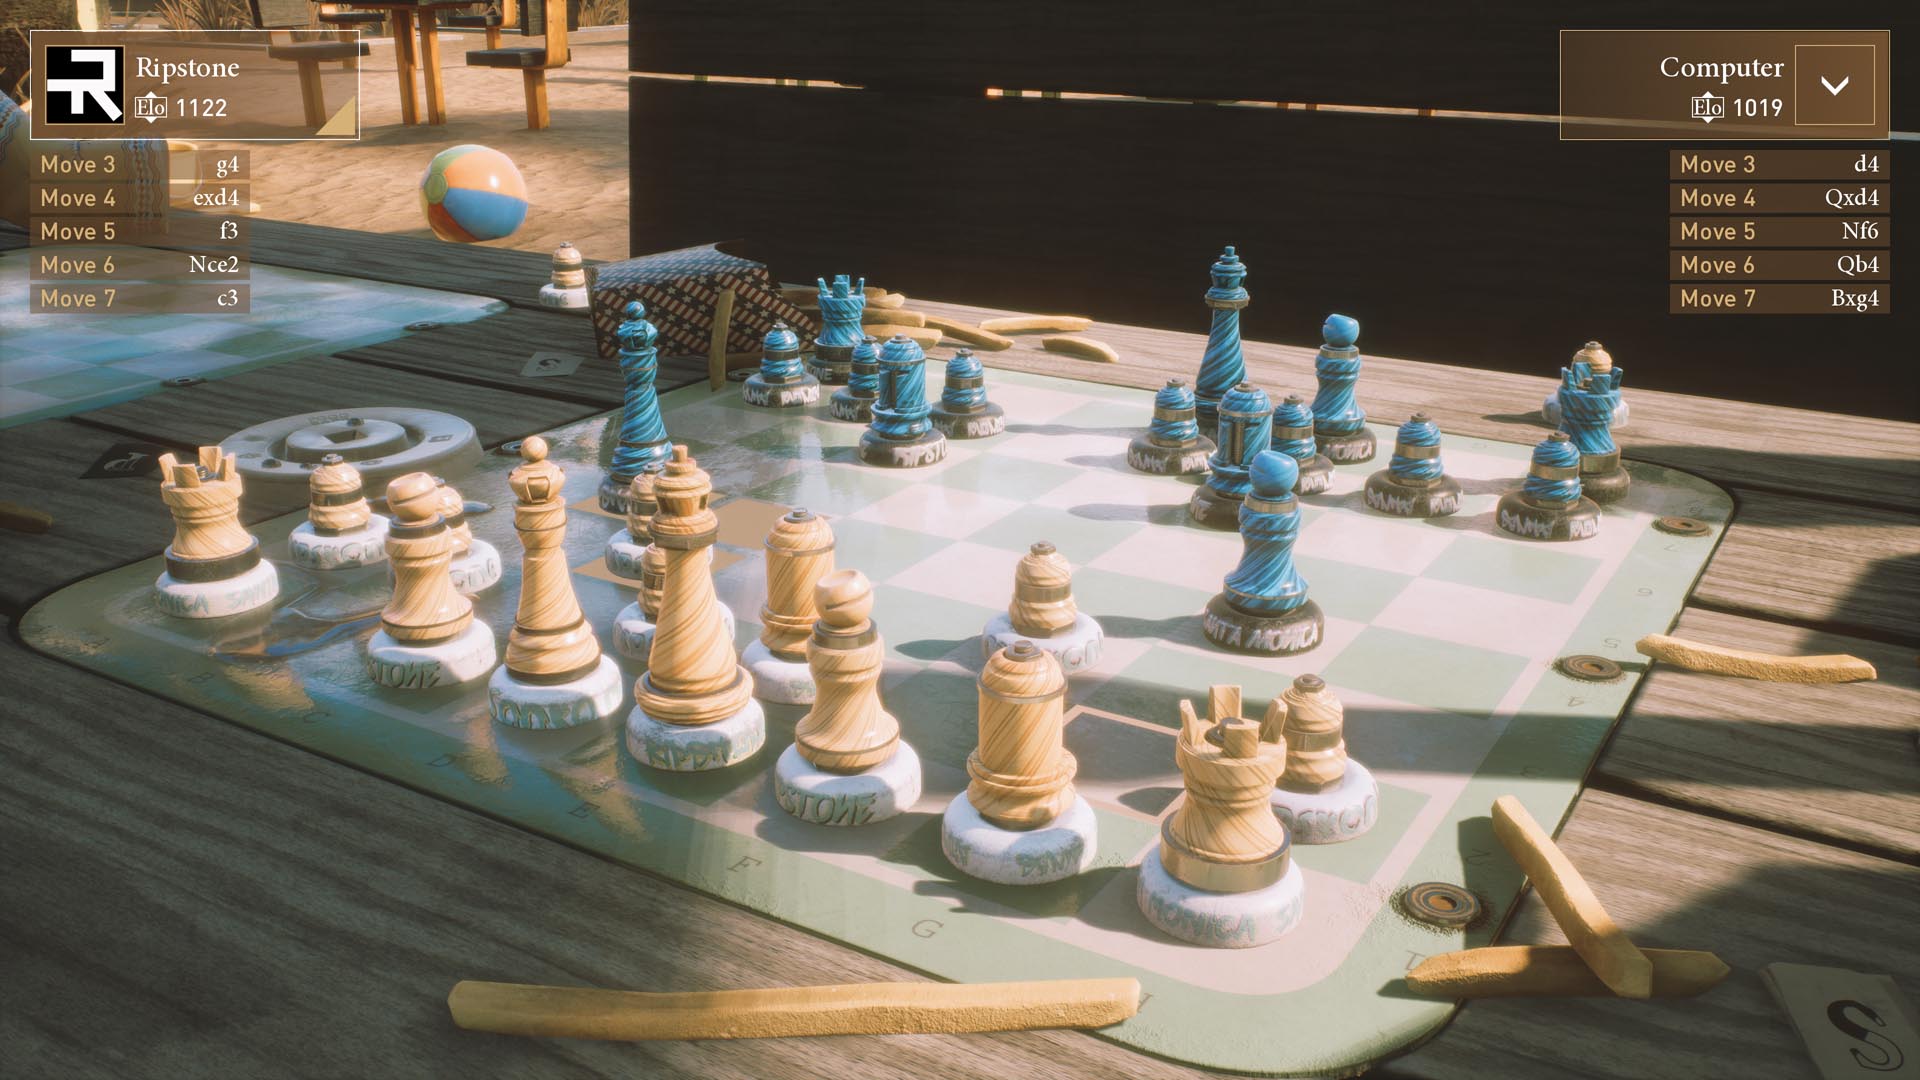 Head to Santa Monica with the latest Chess Ultra DLC